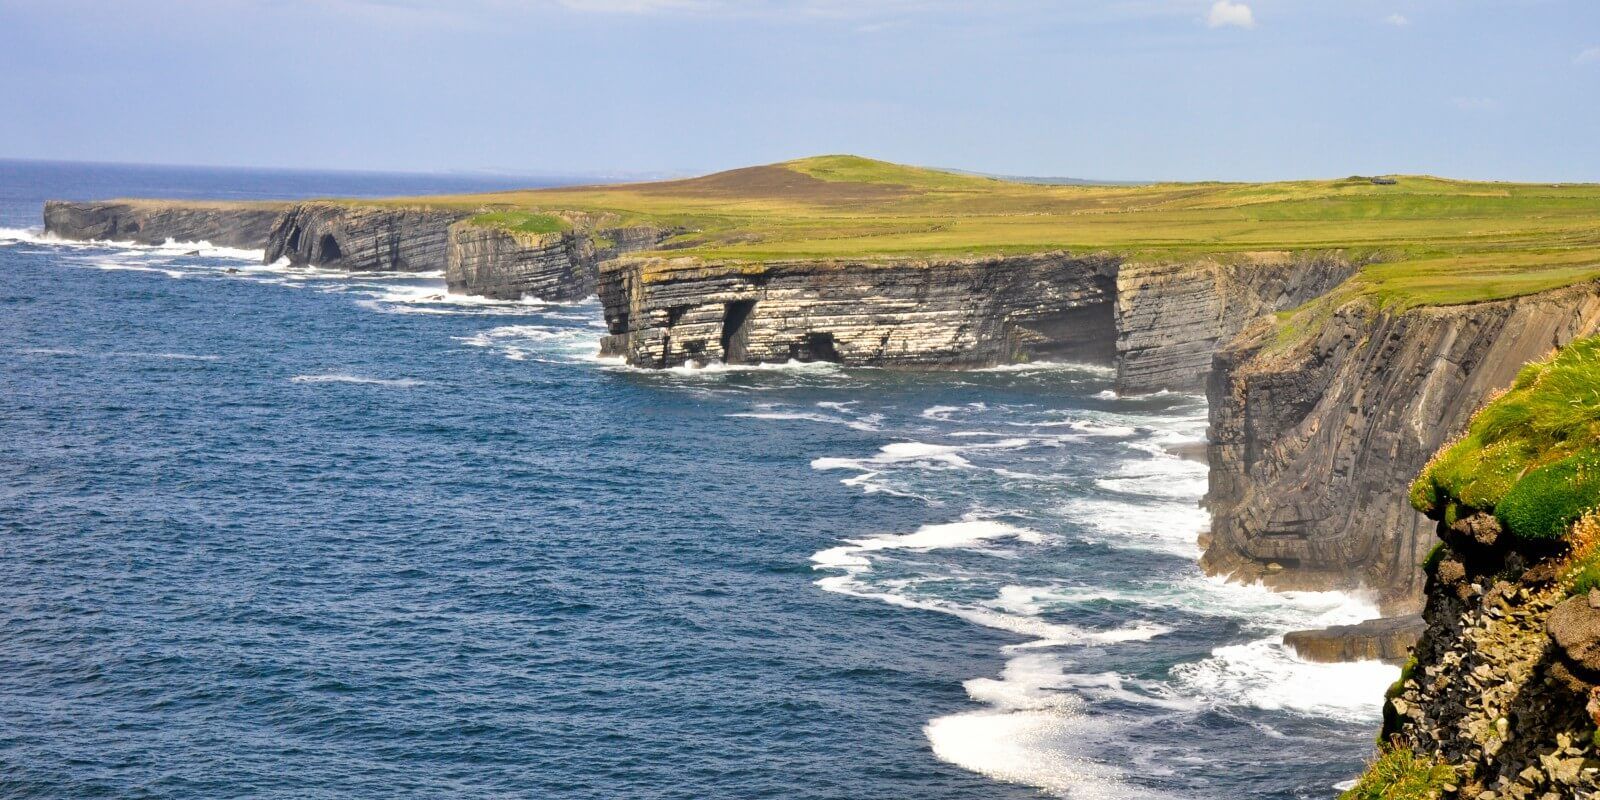 Kilkee Townhouse Cliffs of Moher